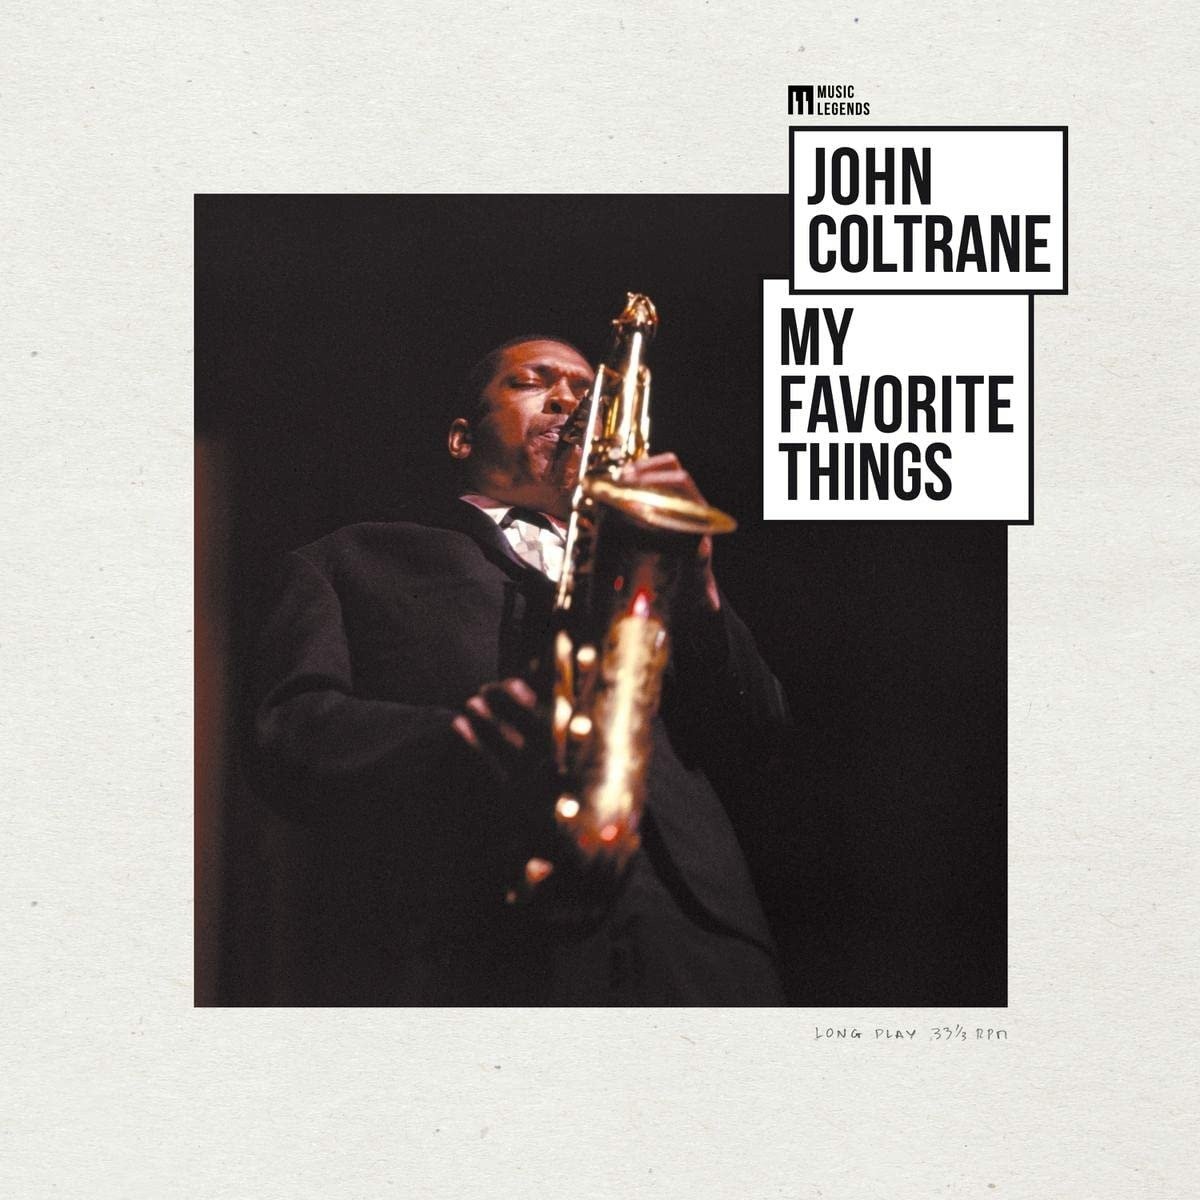 CD Shop - COLTRANE, JOHN MY FAVORITE THINGS (MUSIC LEGENDS COLLECTION)